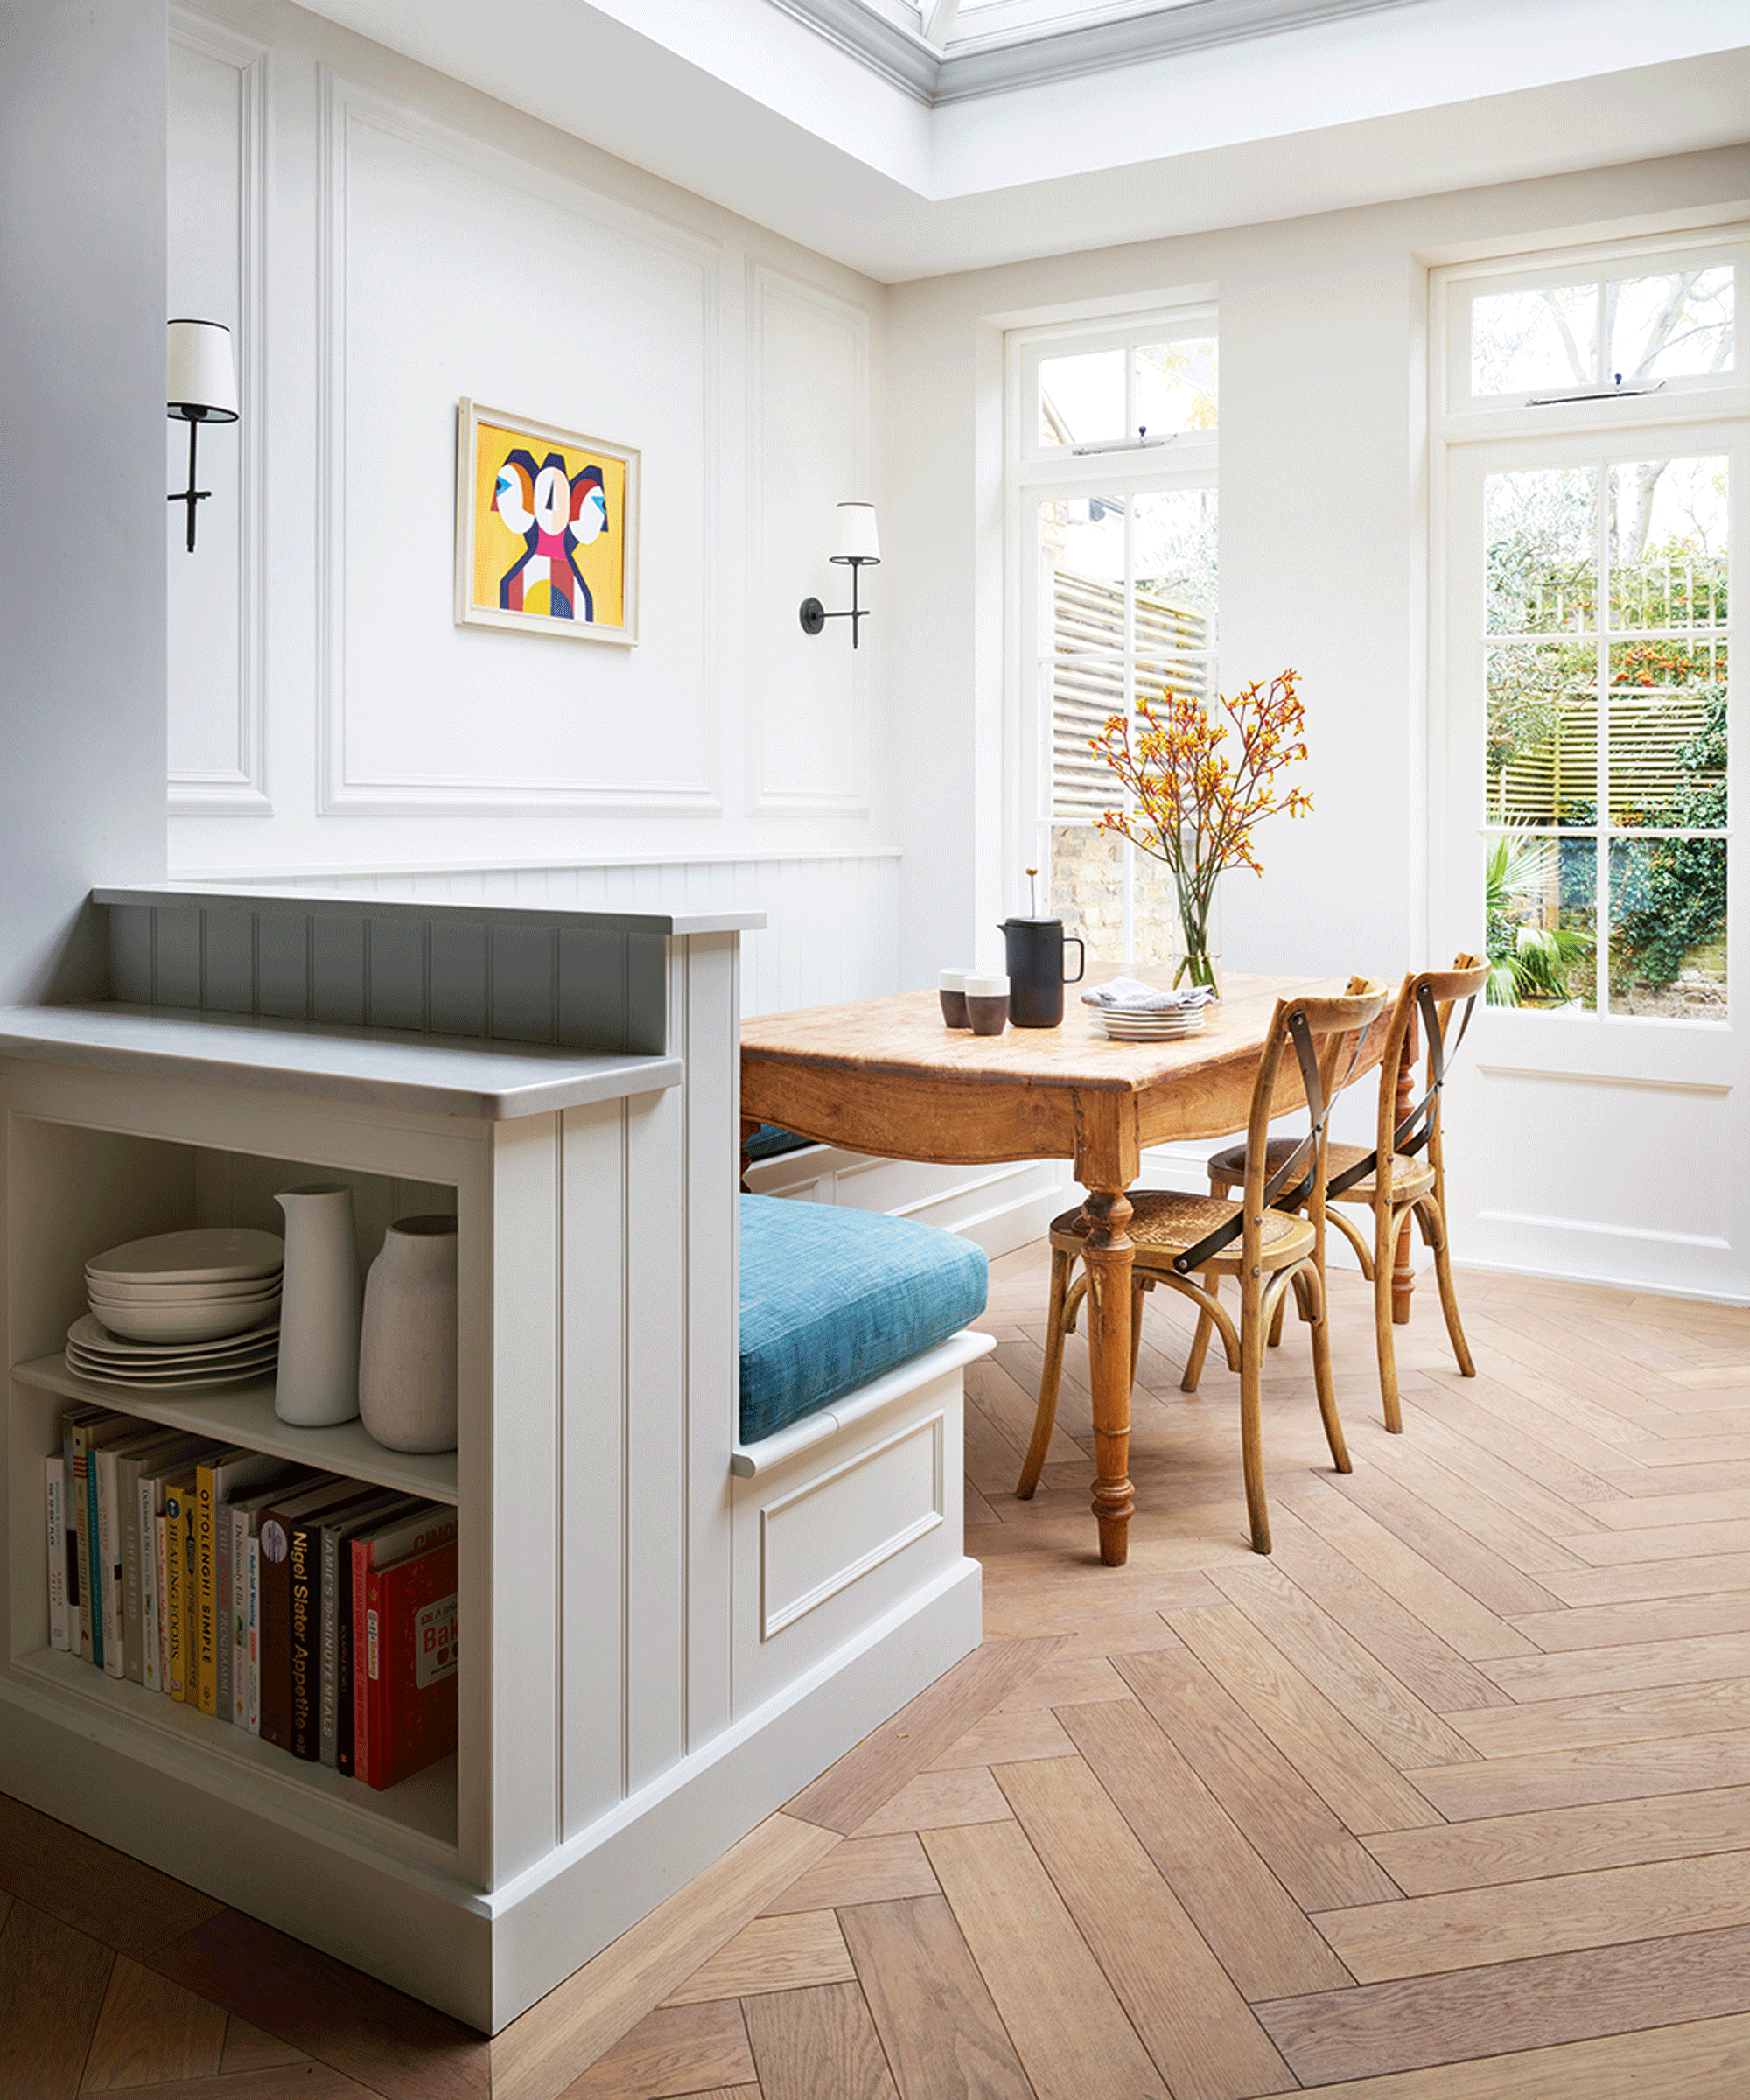 banquette seating with storage in kitchen extension